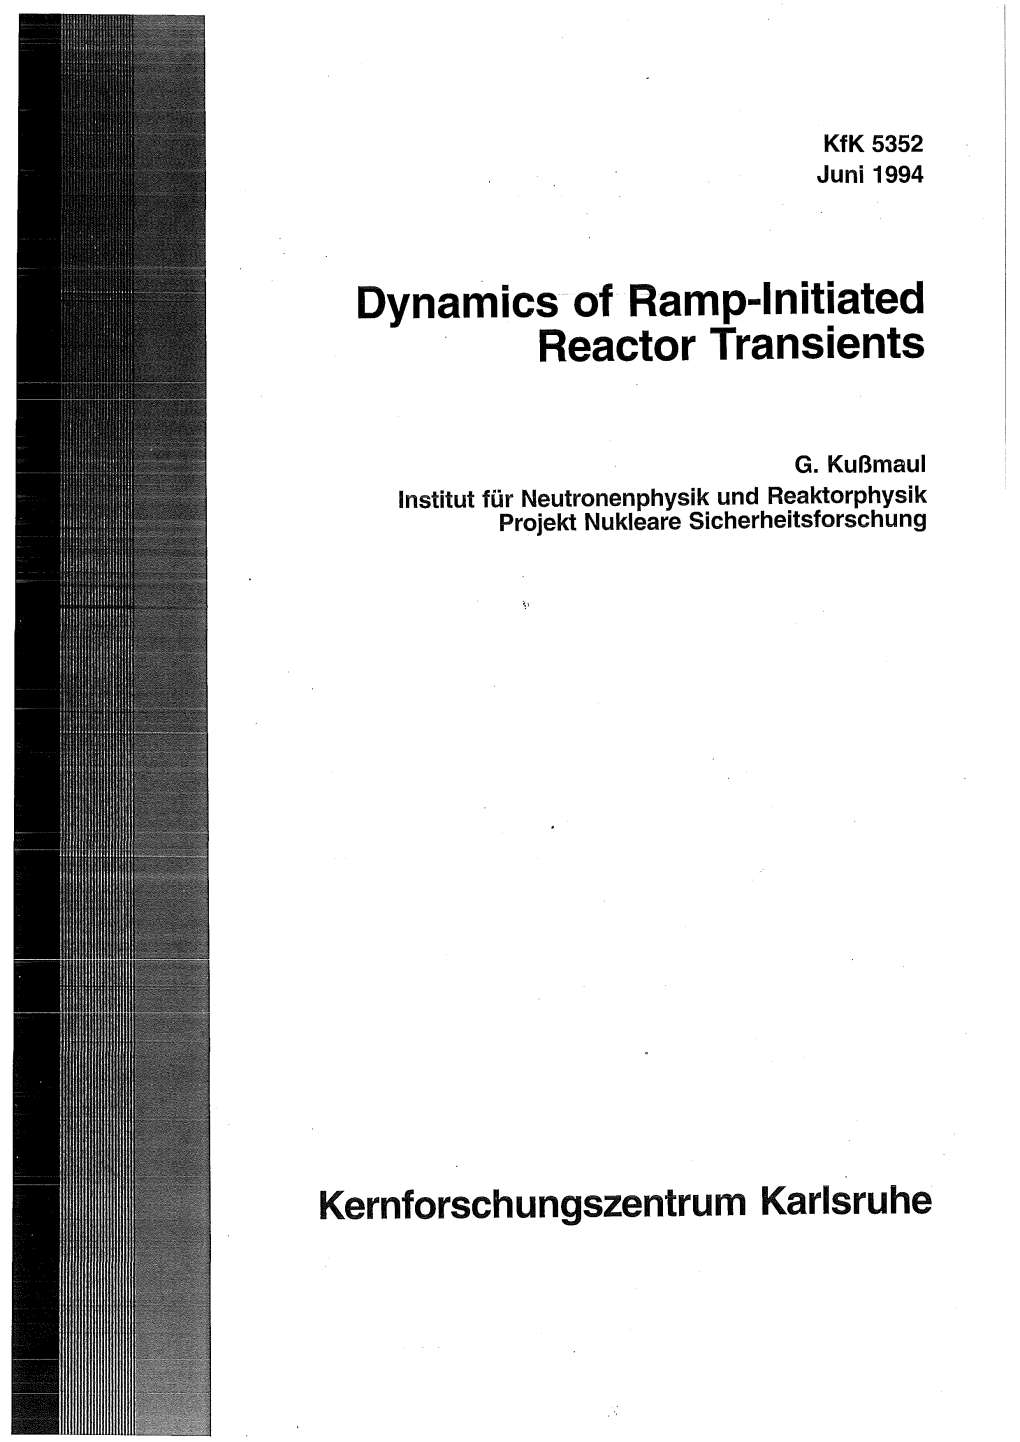 Dynamics of Ramp-Lnitiated Reactor Transients